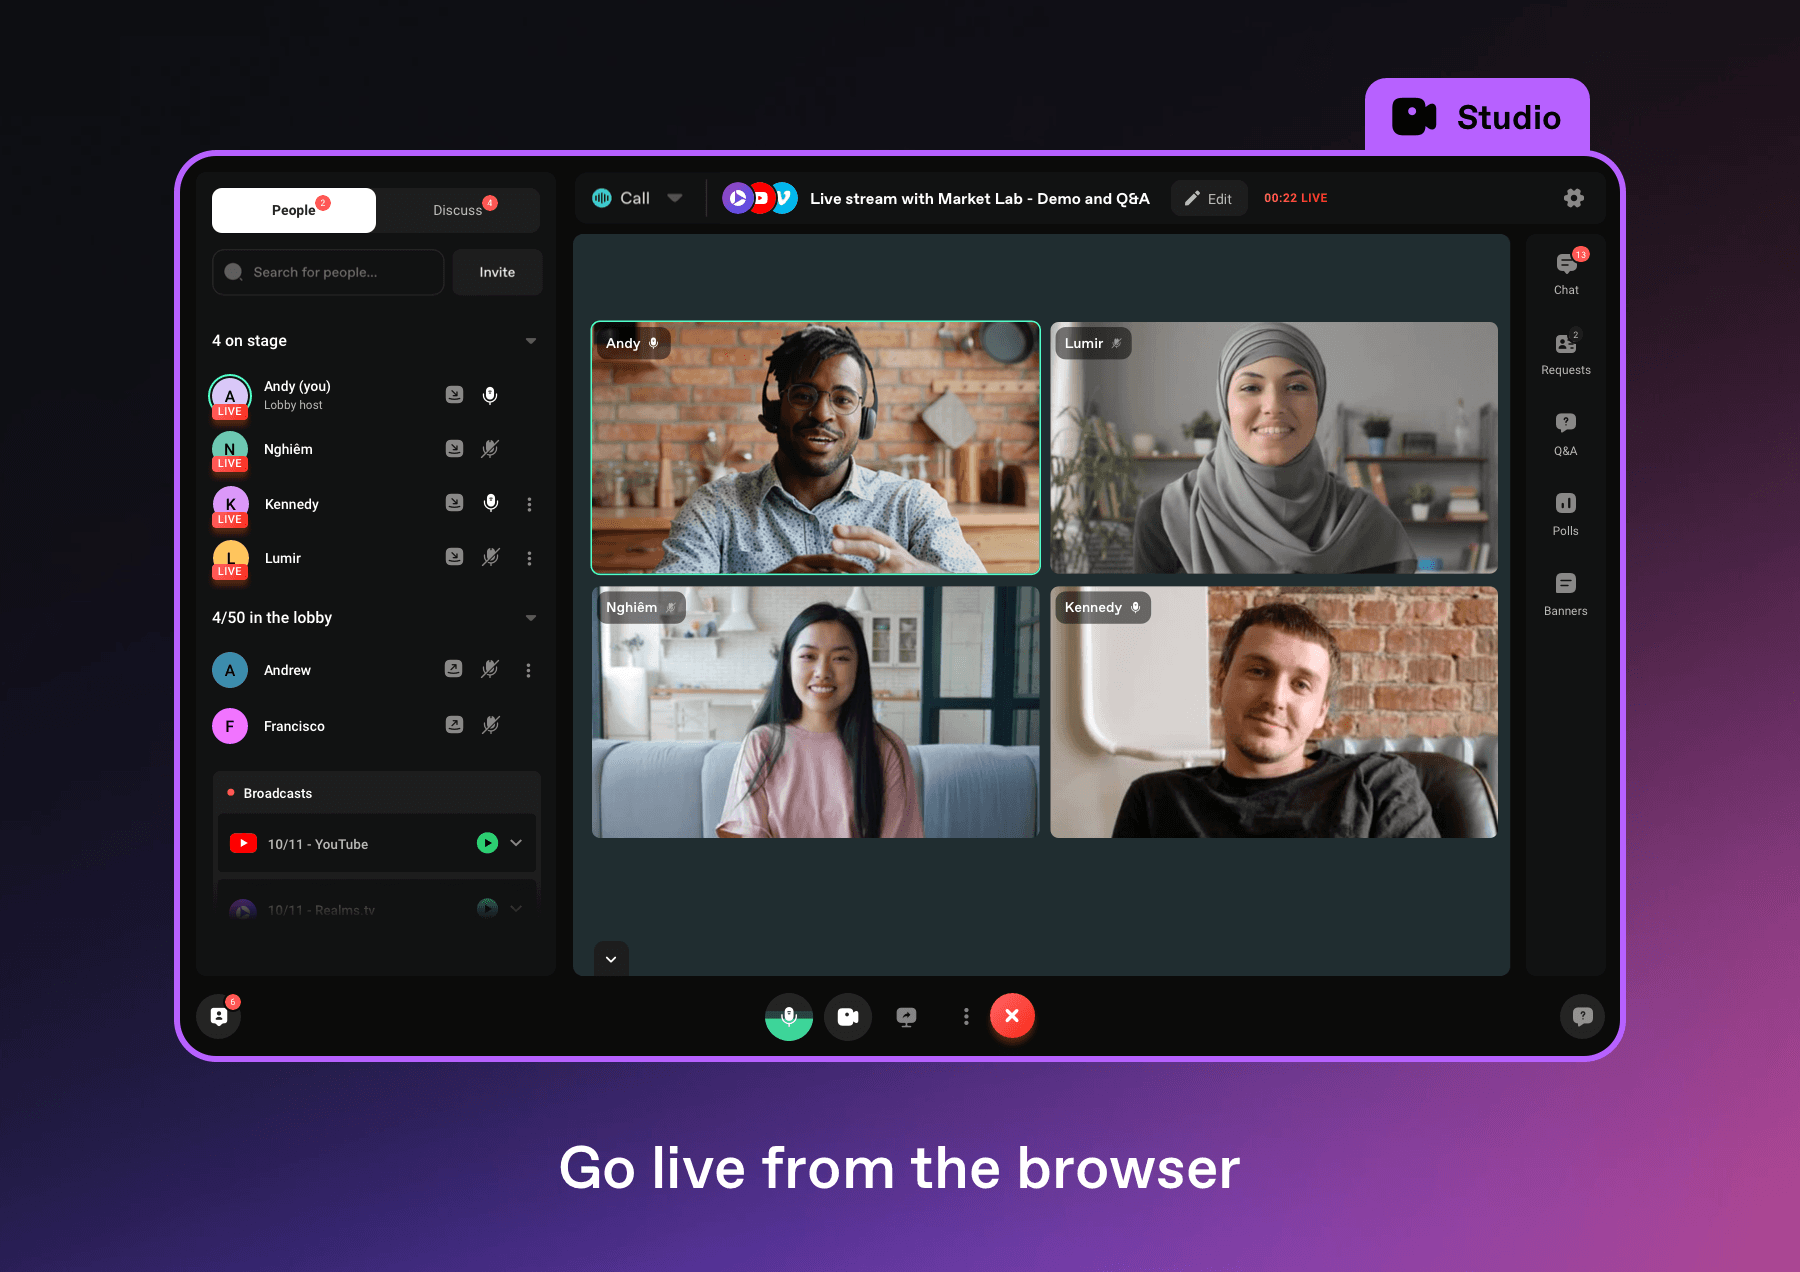 Go live in-browser